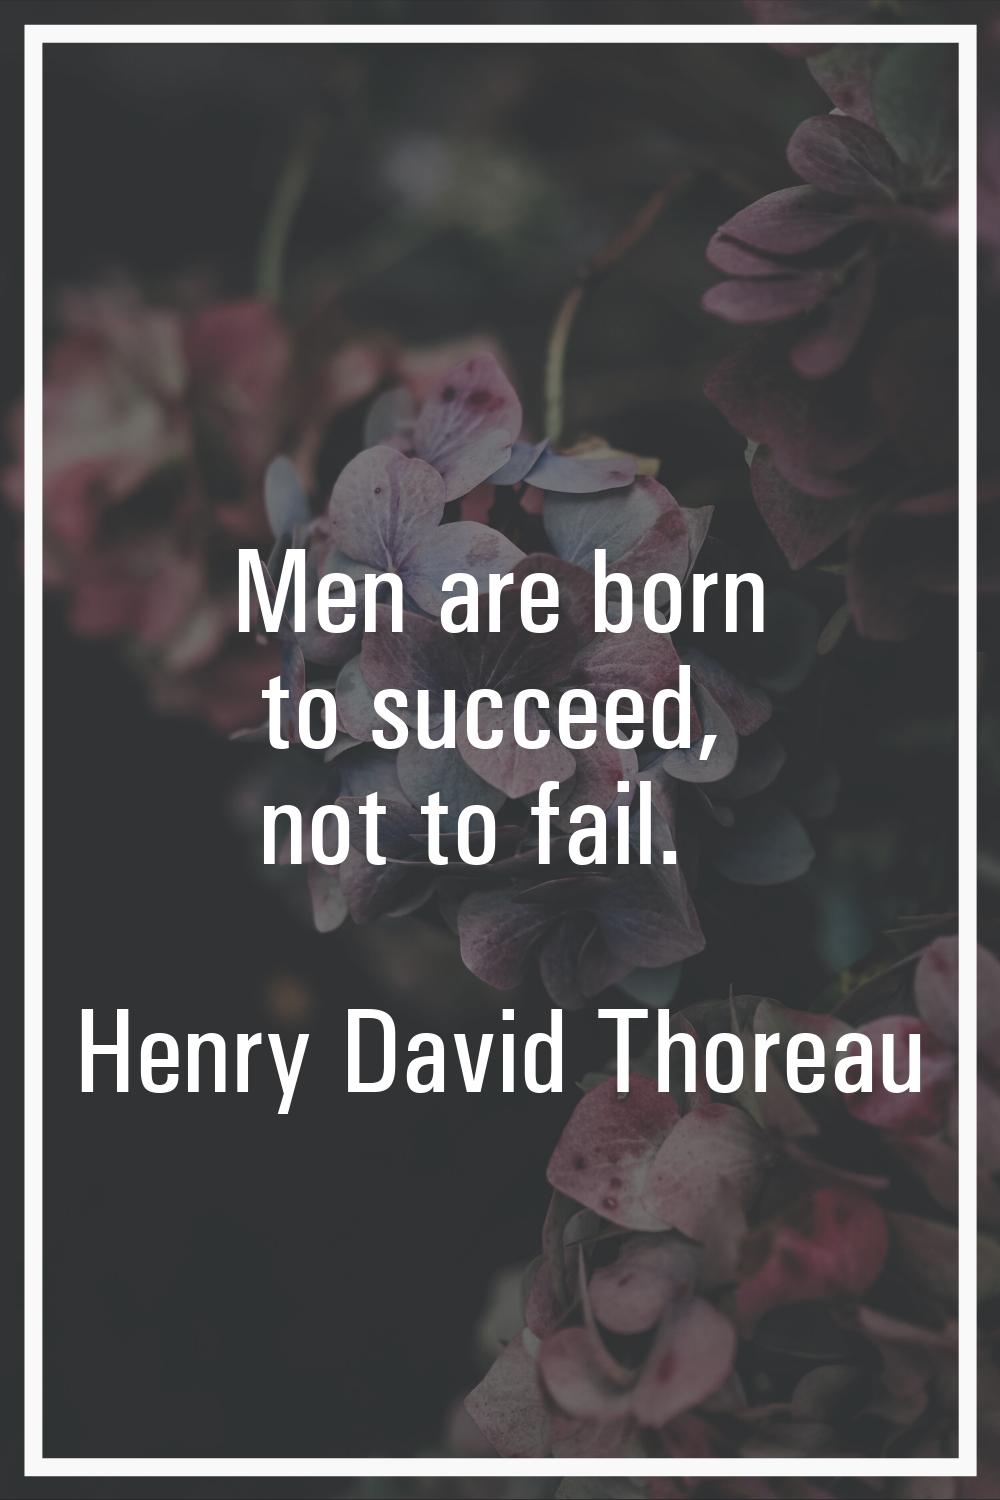 Men are born to succeed, not to fail.